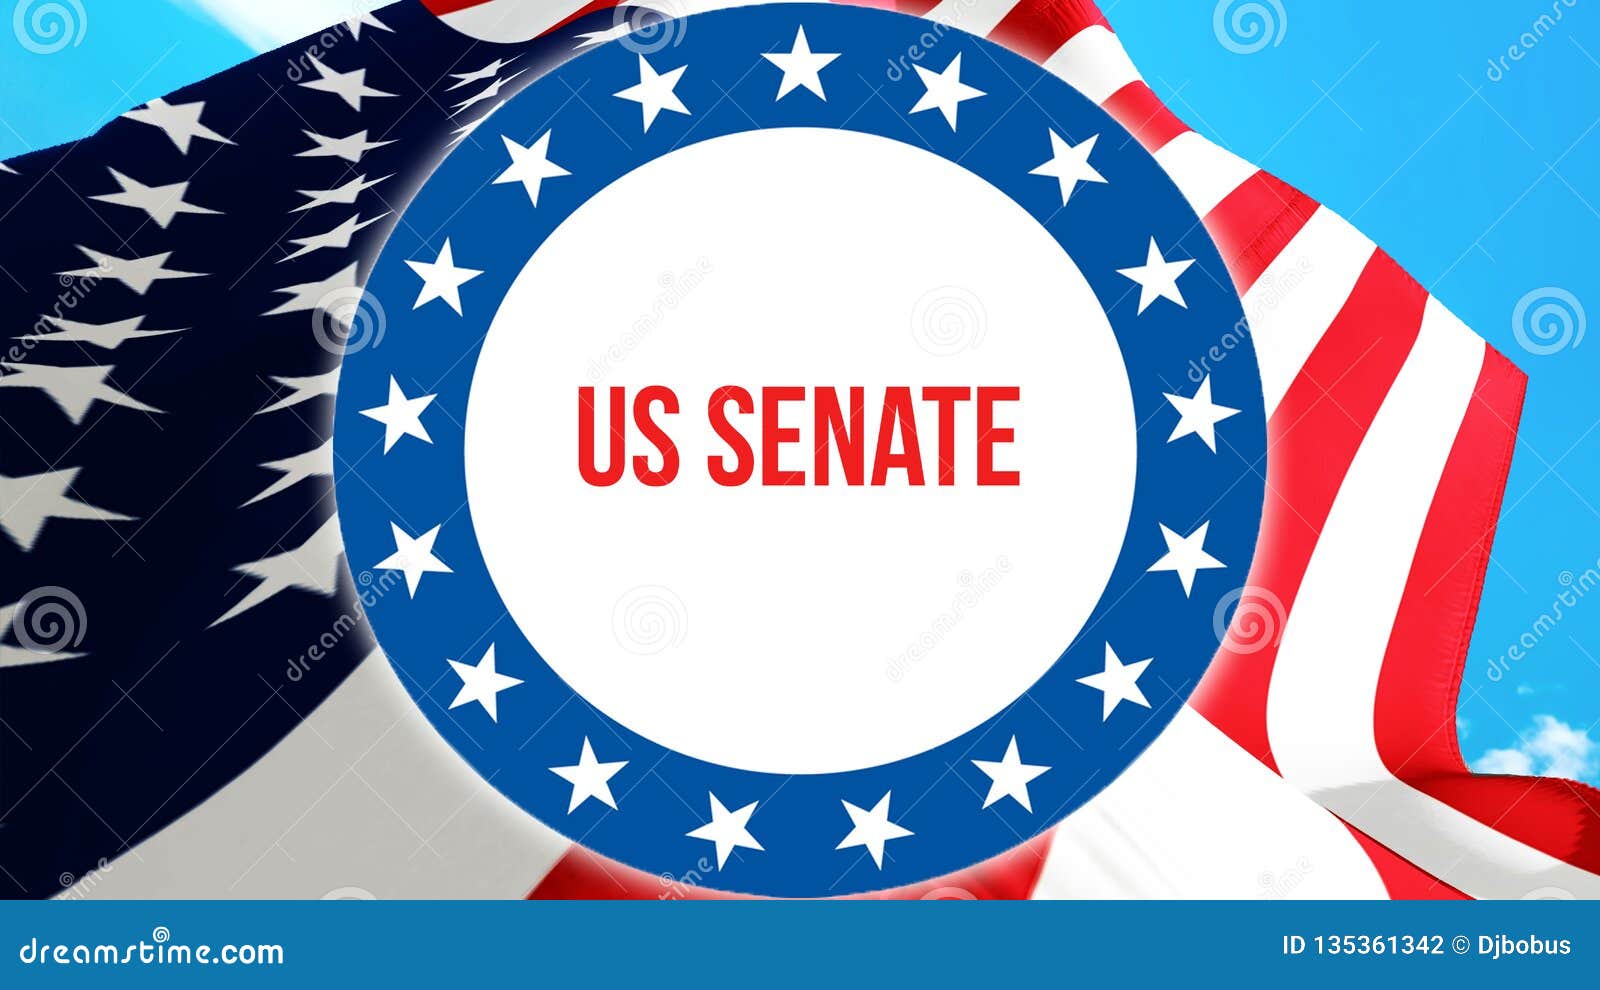 us senate election on a usa background, 3d rendering. united states of america flag waving in the wind. voting, freedom democracy